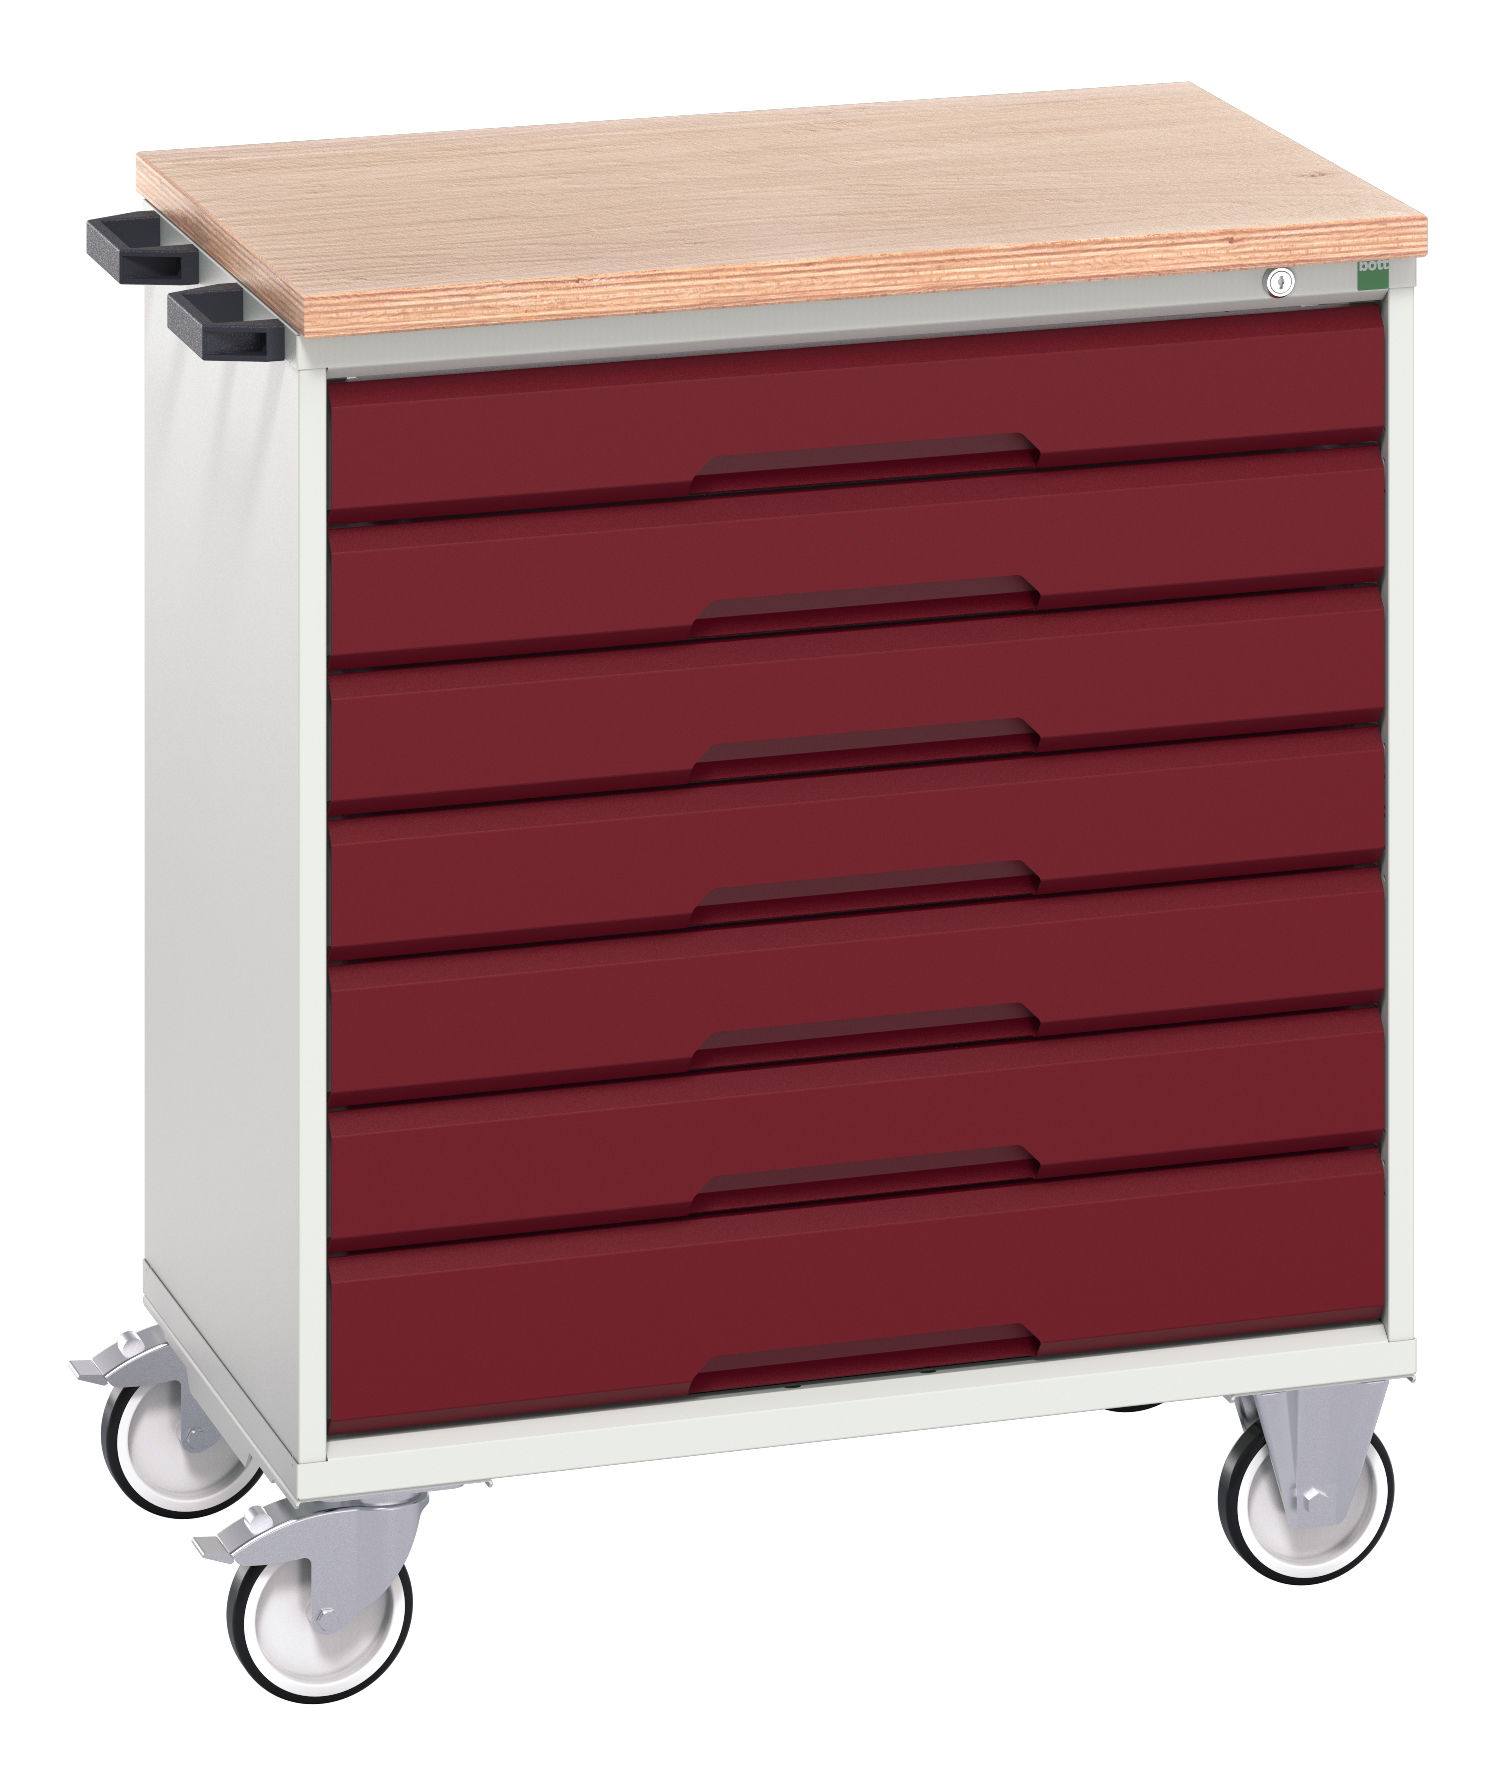 Bott Verso Mobile Drawer Cabinet With 7 Drawers & Multiplex Top - 16927007.24